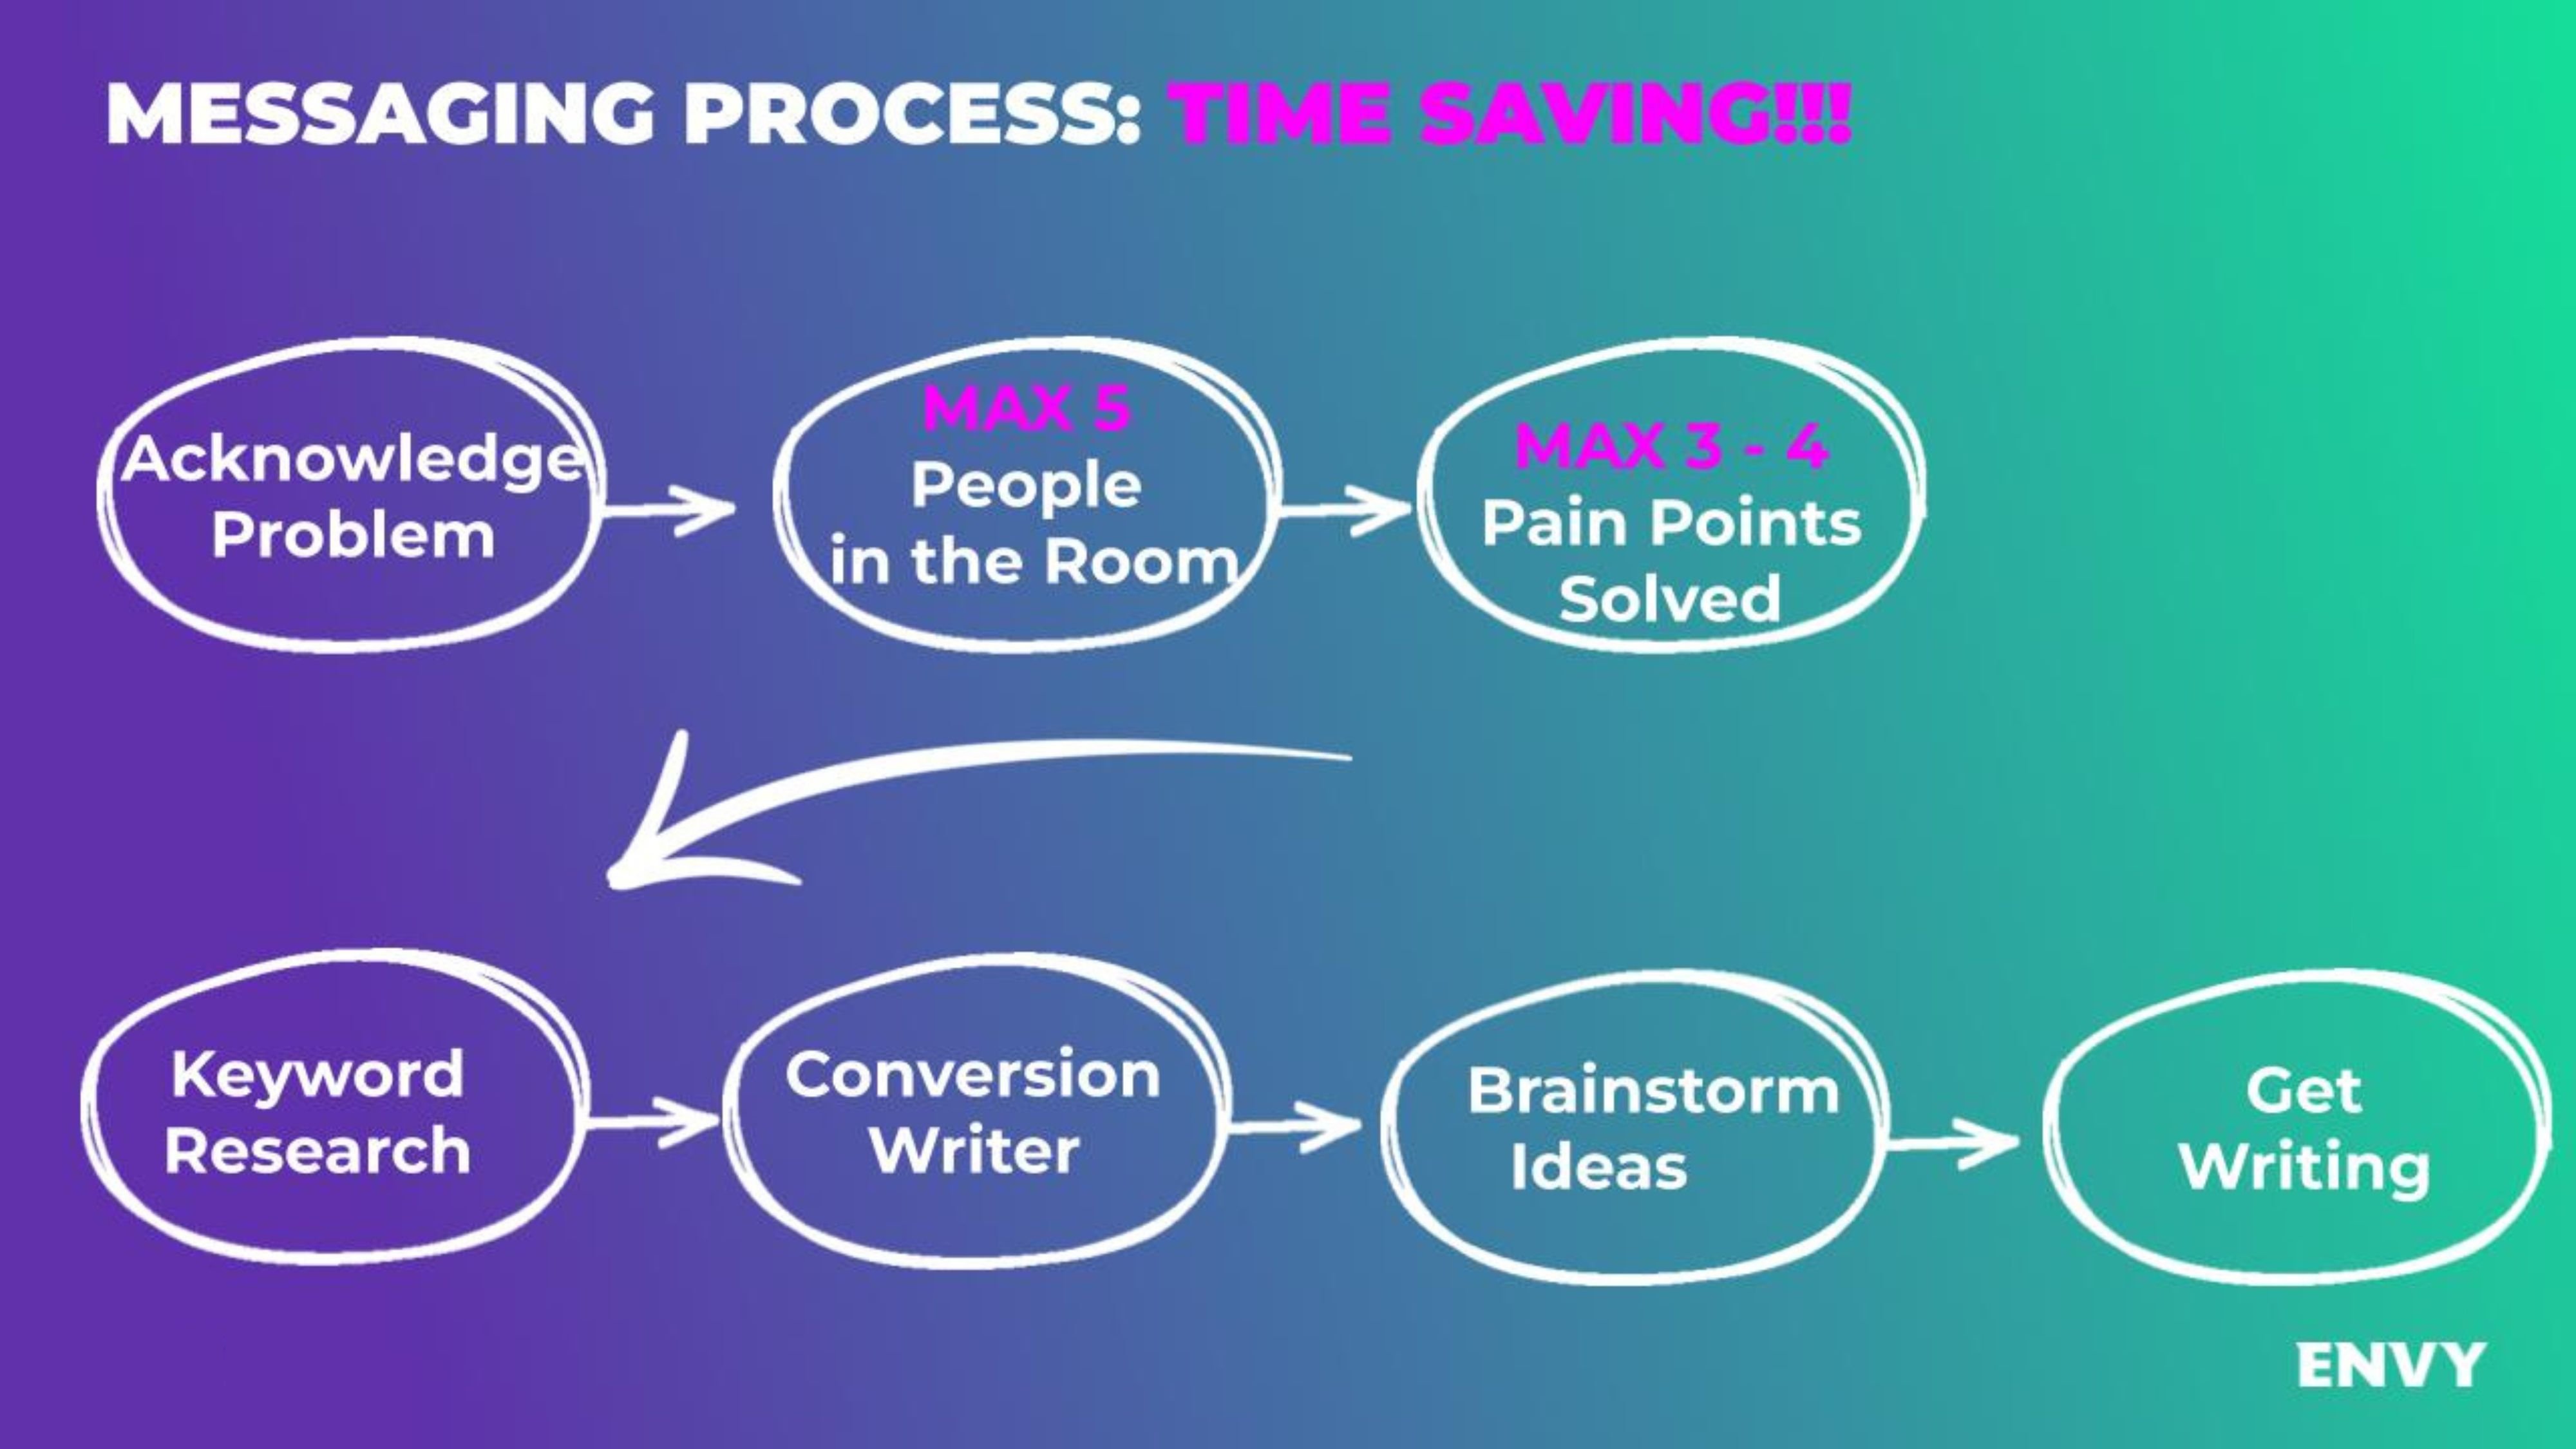 The full messaging process should save time